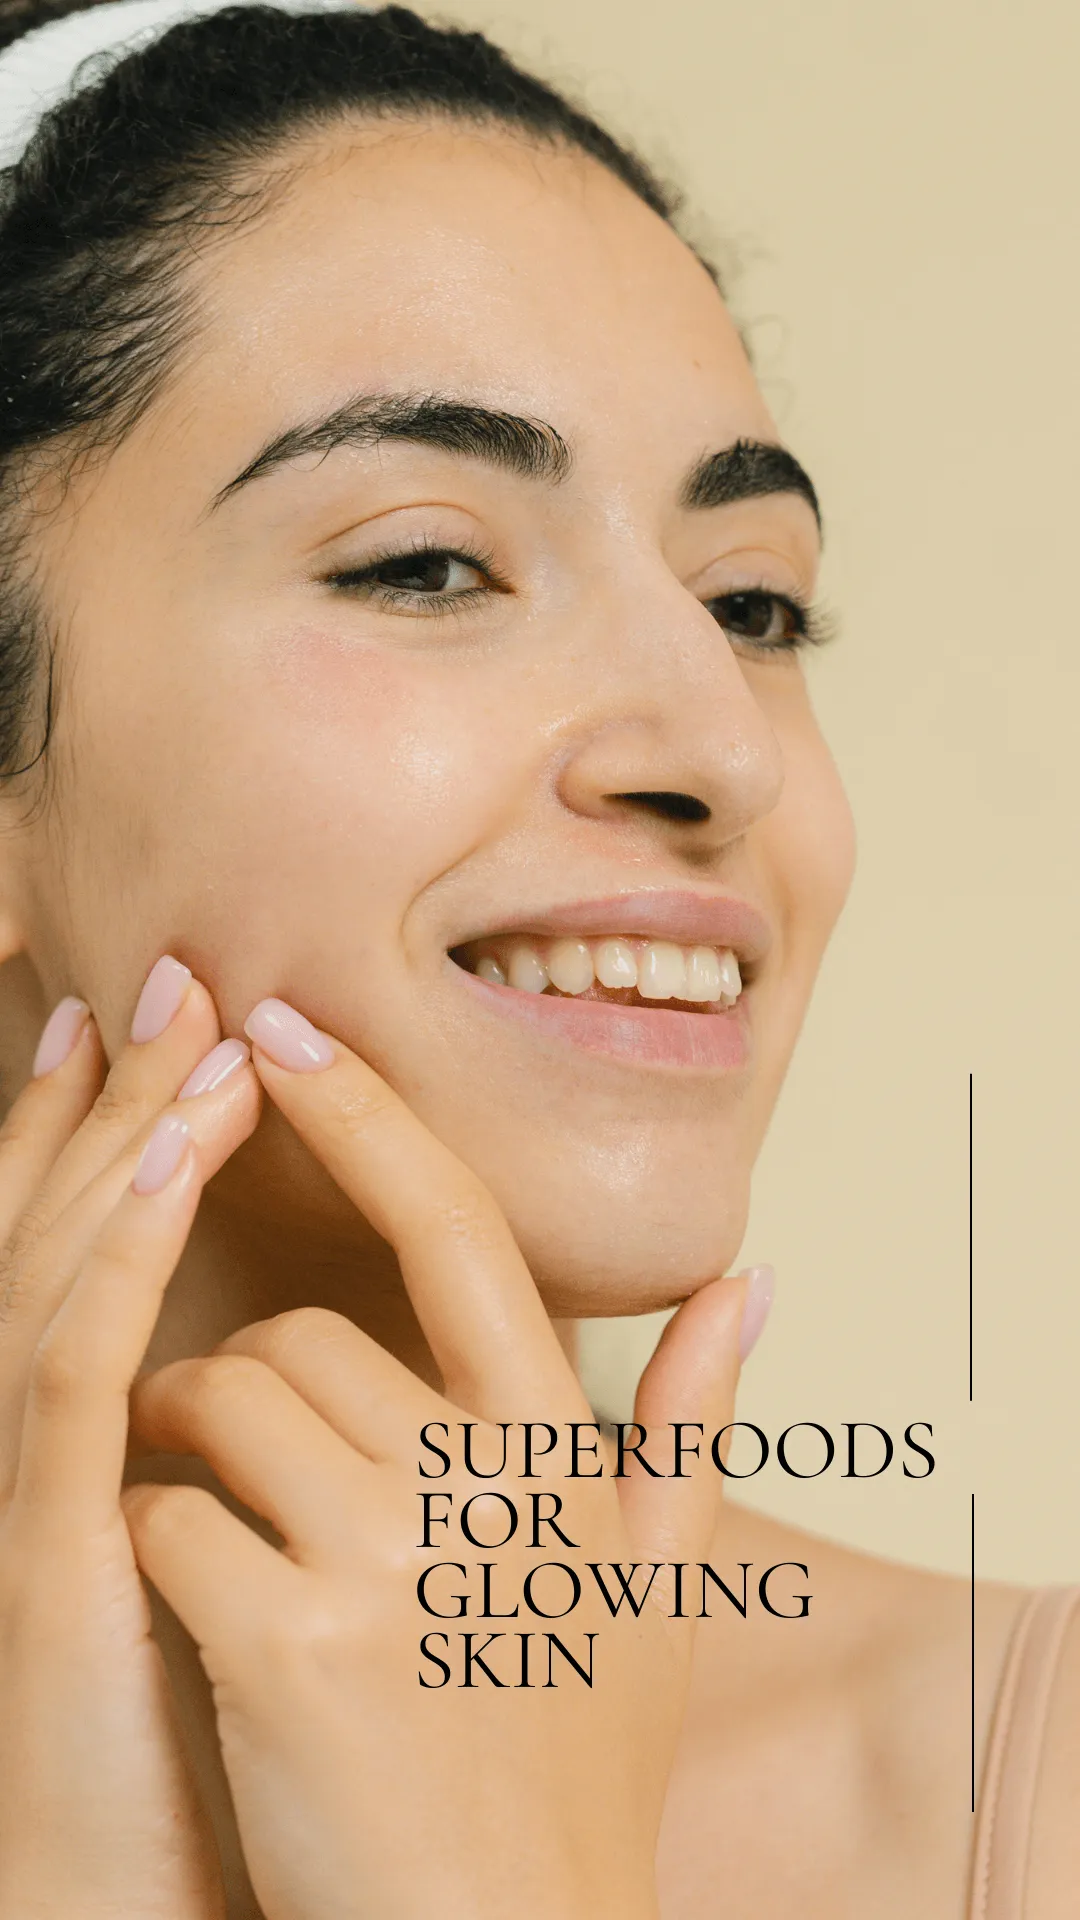 Superfoods for Glowing Skin